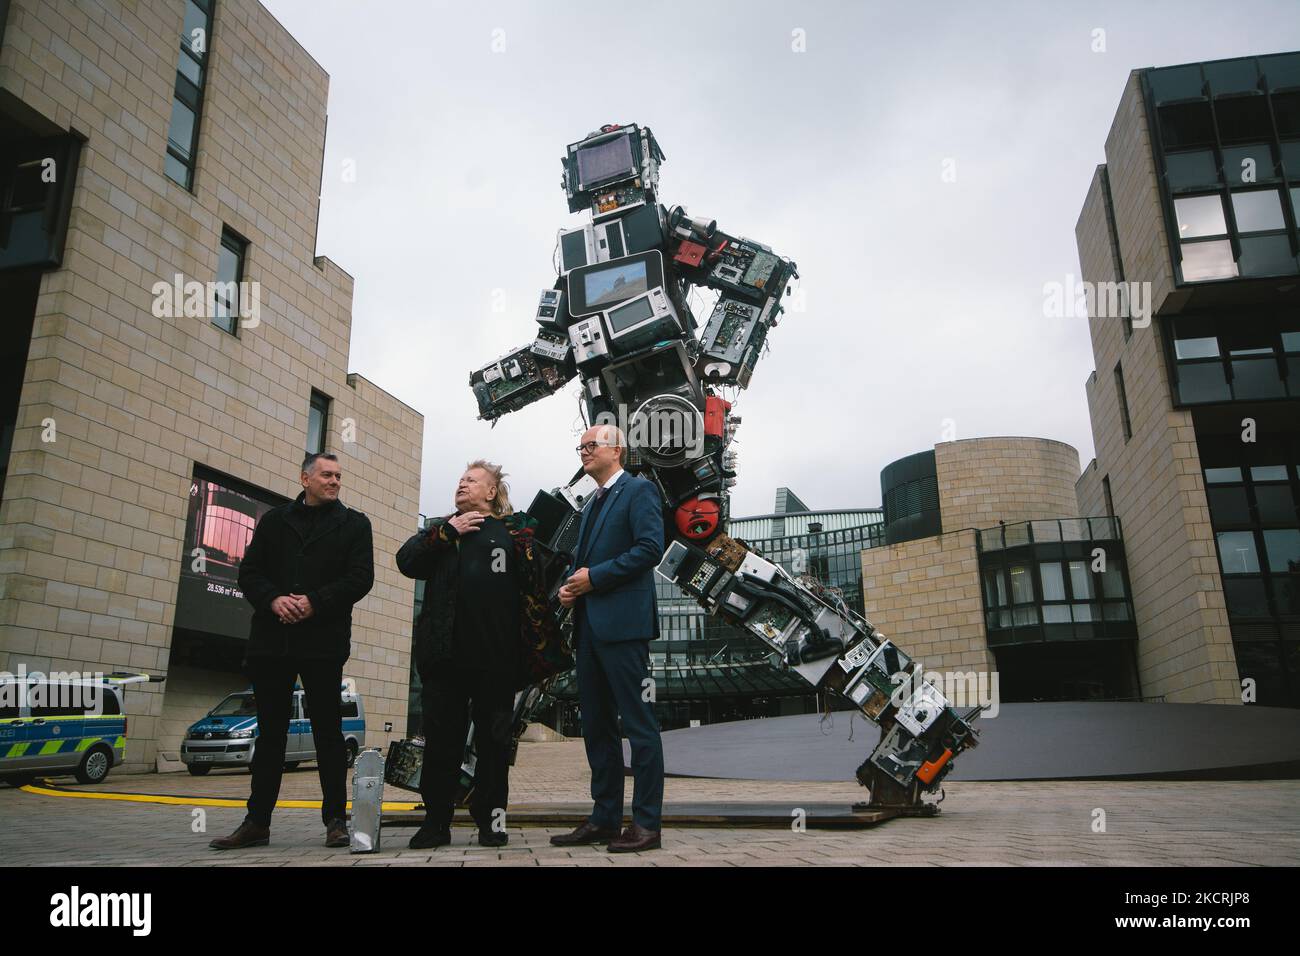 Artist HA schult, NRW state president André Kuper and director of wertgarantie Thilo Dröge attend 'Wertgigant', ' valuable Giant' installation in front of state Parlament in Duesseldorf, Germany on Oct 26, 2021 new art installation 'Wertgigant', ' valuable Giant', in front of state Parlament in Duesseldorf, Germany on Oct 26, 2021 (Photo by Ying Tang/NurPhoto) Stock Photo